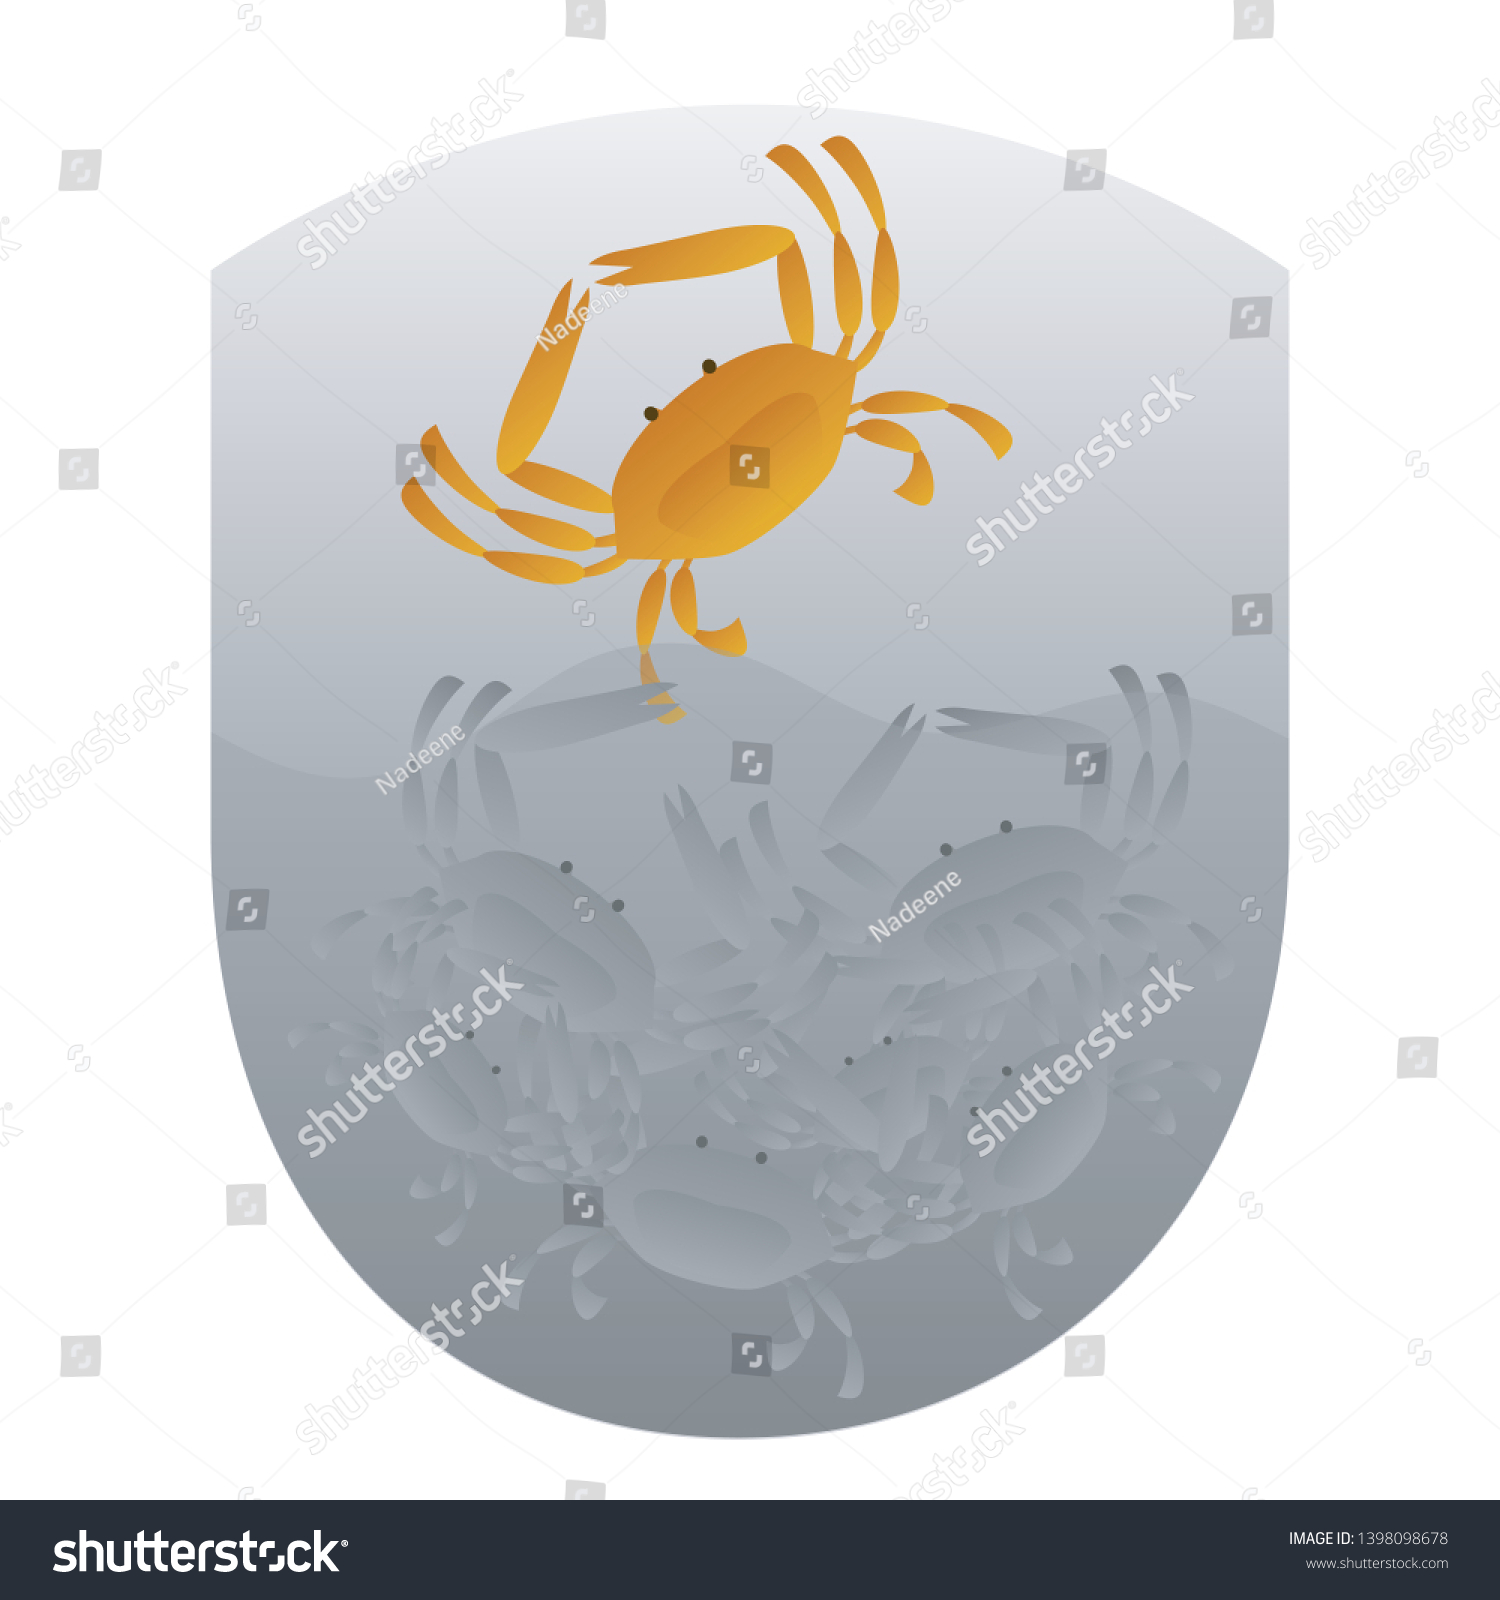 SVG of Vector image of a brown crab trying to climb out of a stylized bucket while other grey crabs are trying to stop him. Crabs in a bucket. Crab mentality concept. Behavior concept. svg